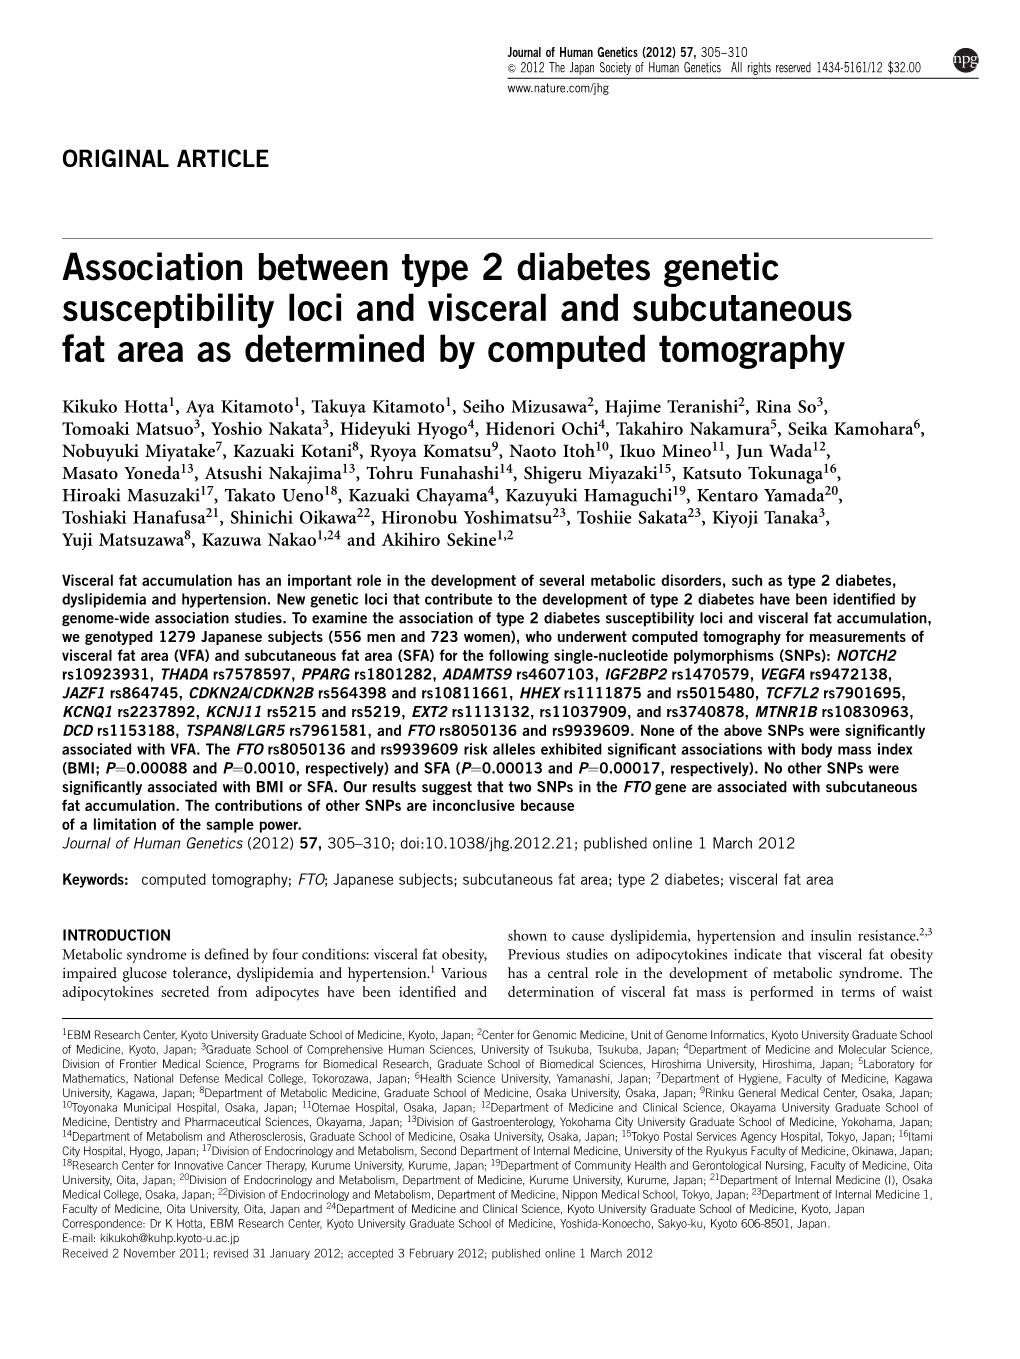 Association Between Type 2 Diabetes Genetic Susceptibility Loci and Visceral and Subcutaneous Fat Area As Determined by Computed Tomography